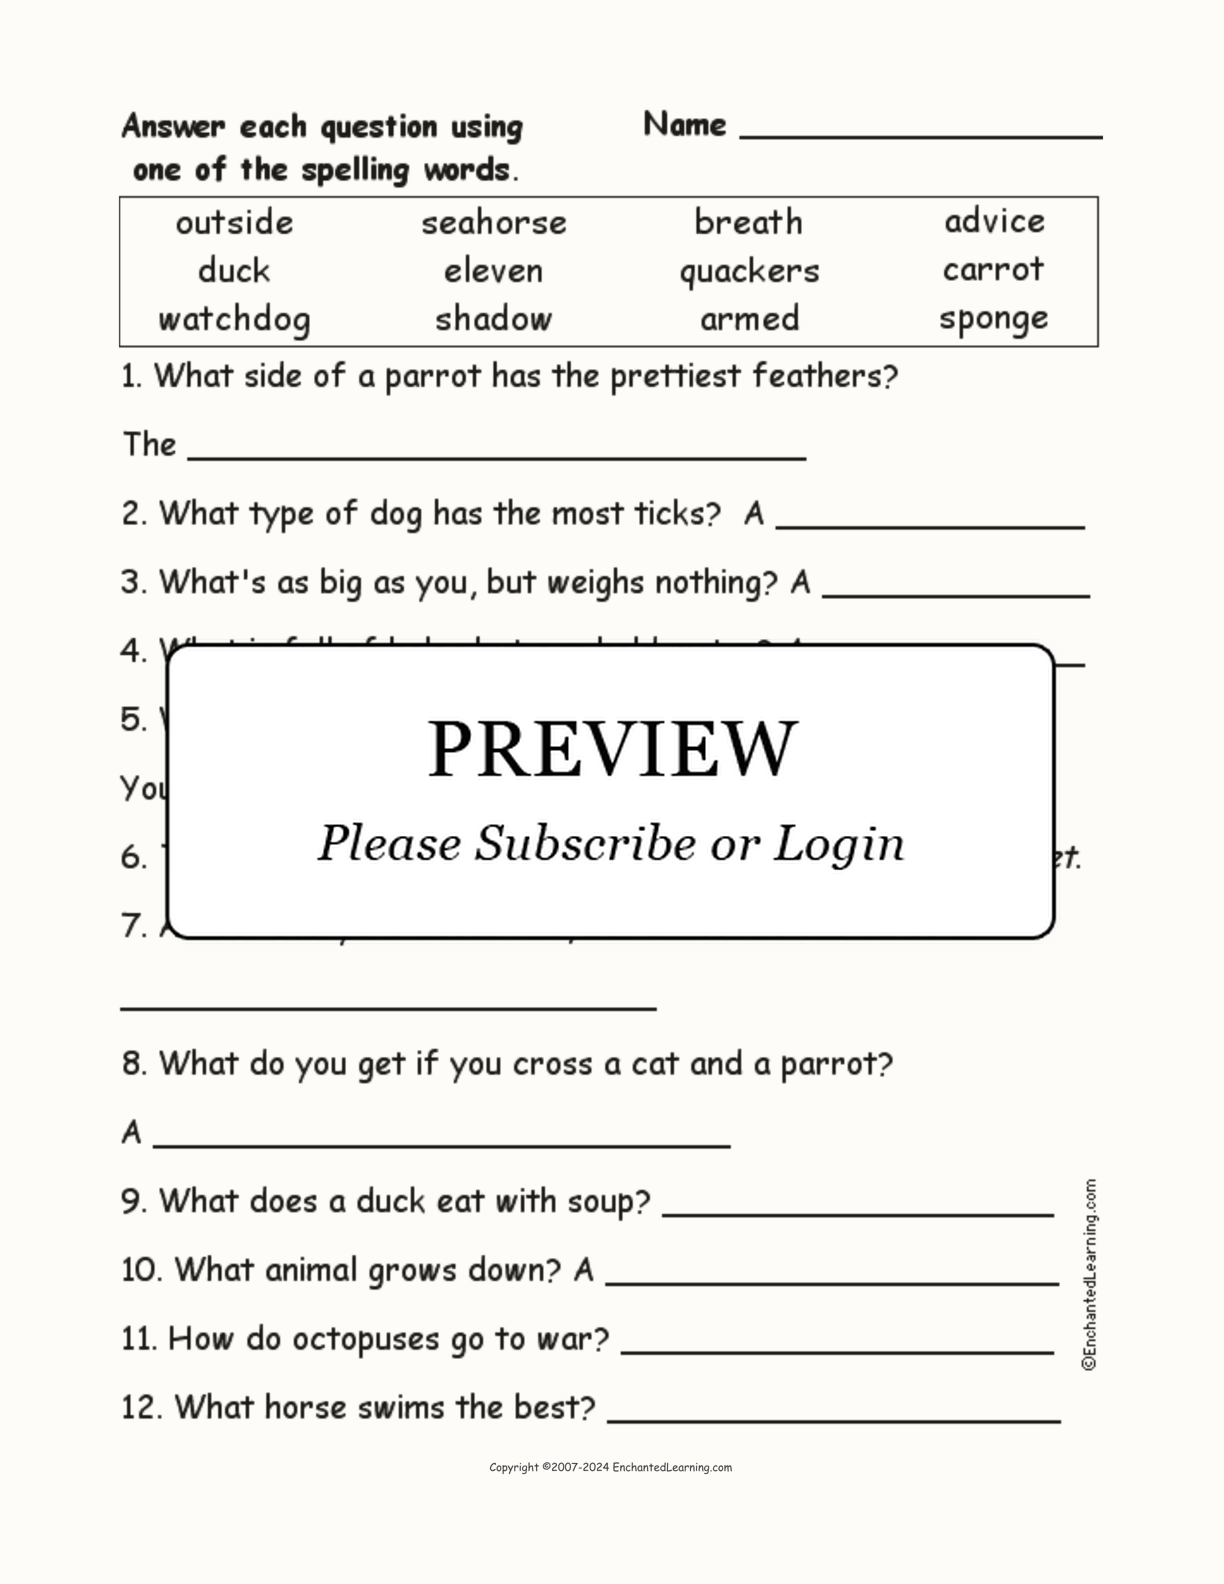 April Fool's Day Spelling Word Questions interactive worksheet page 1